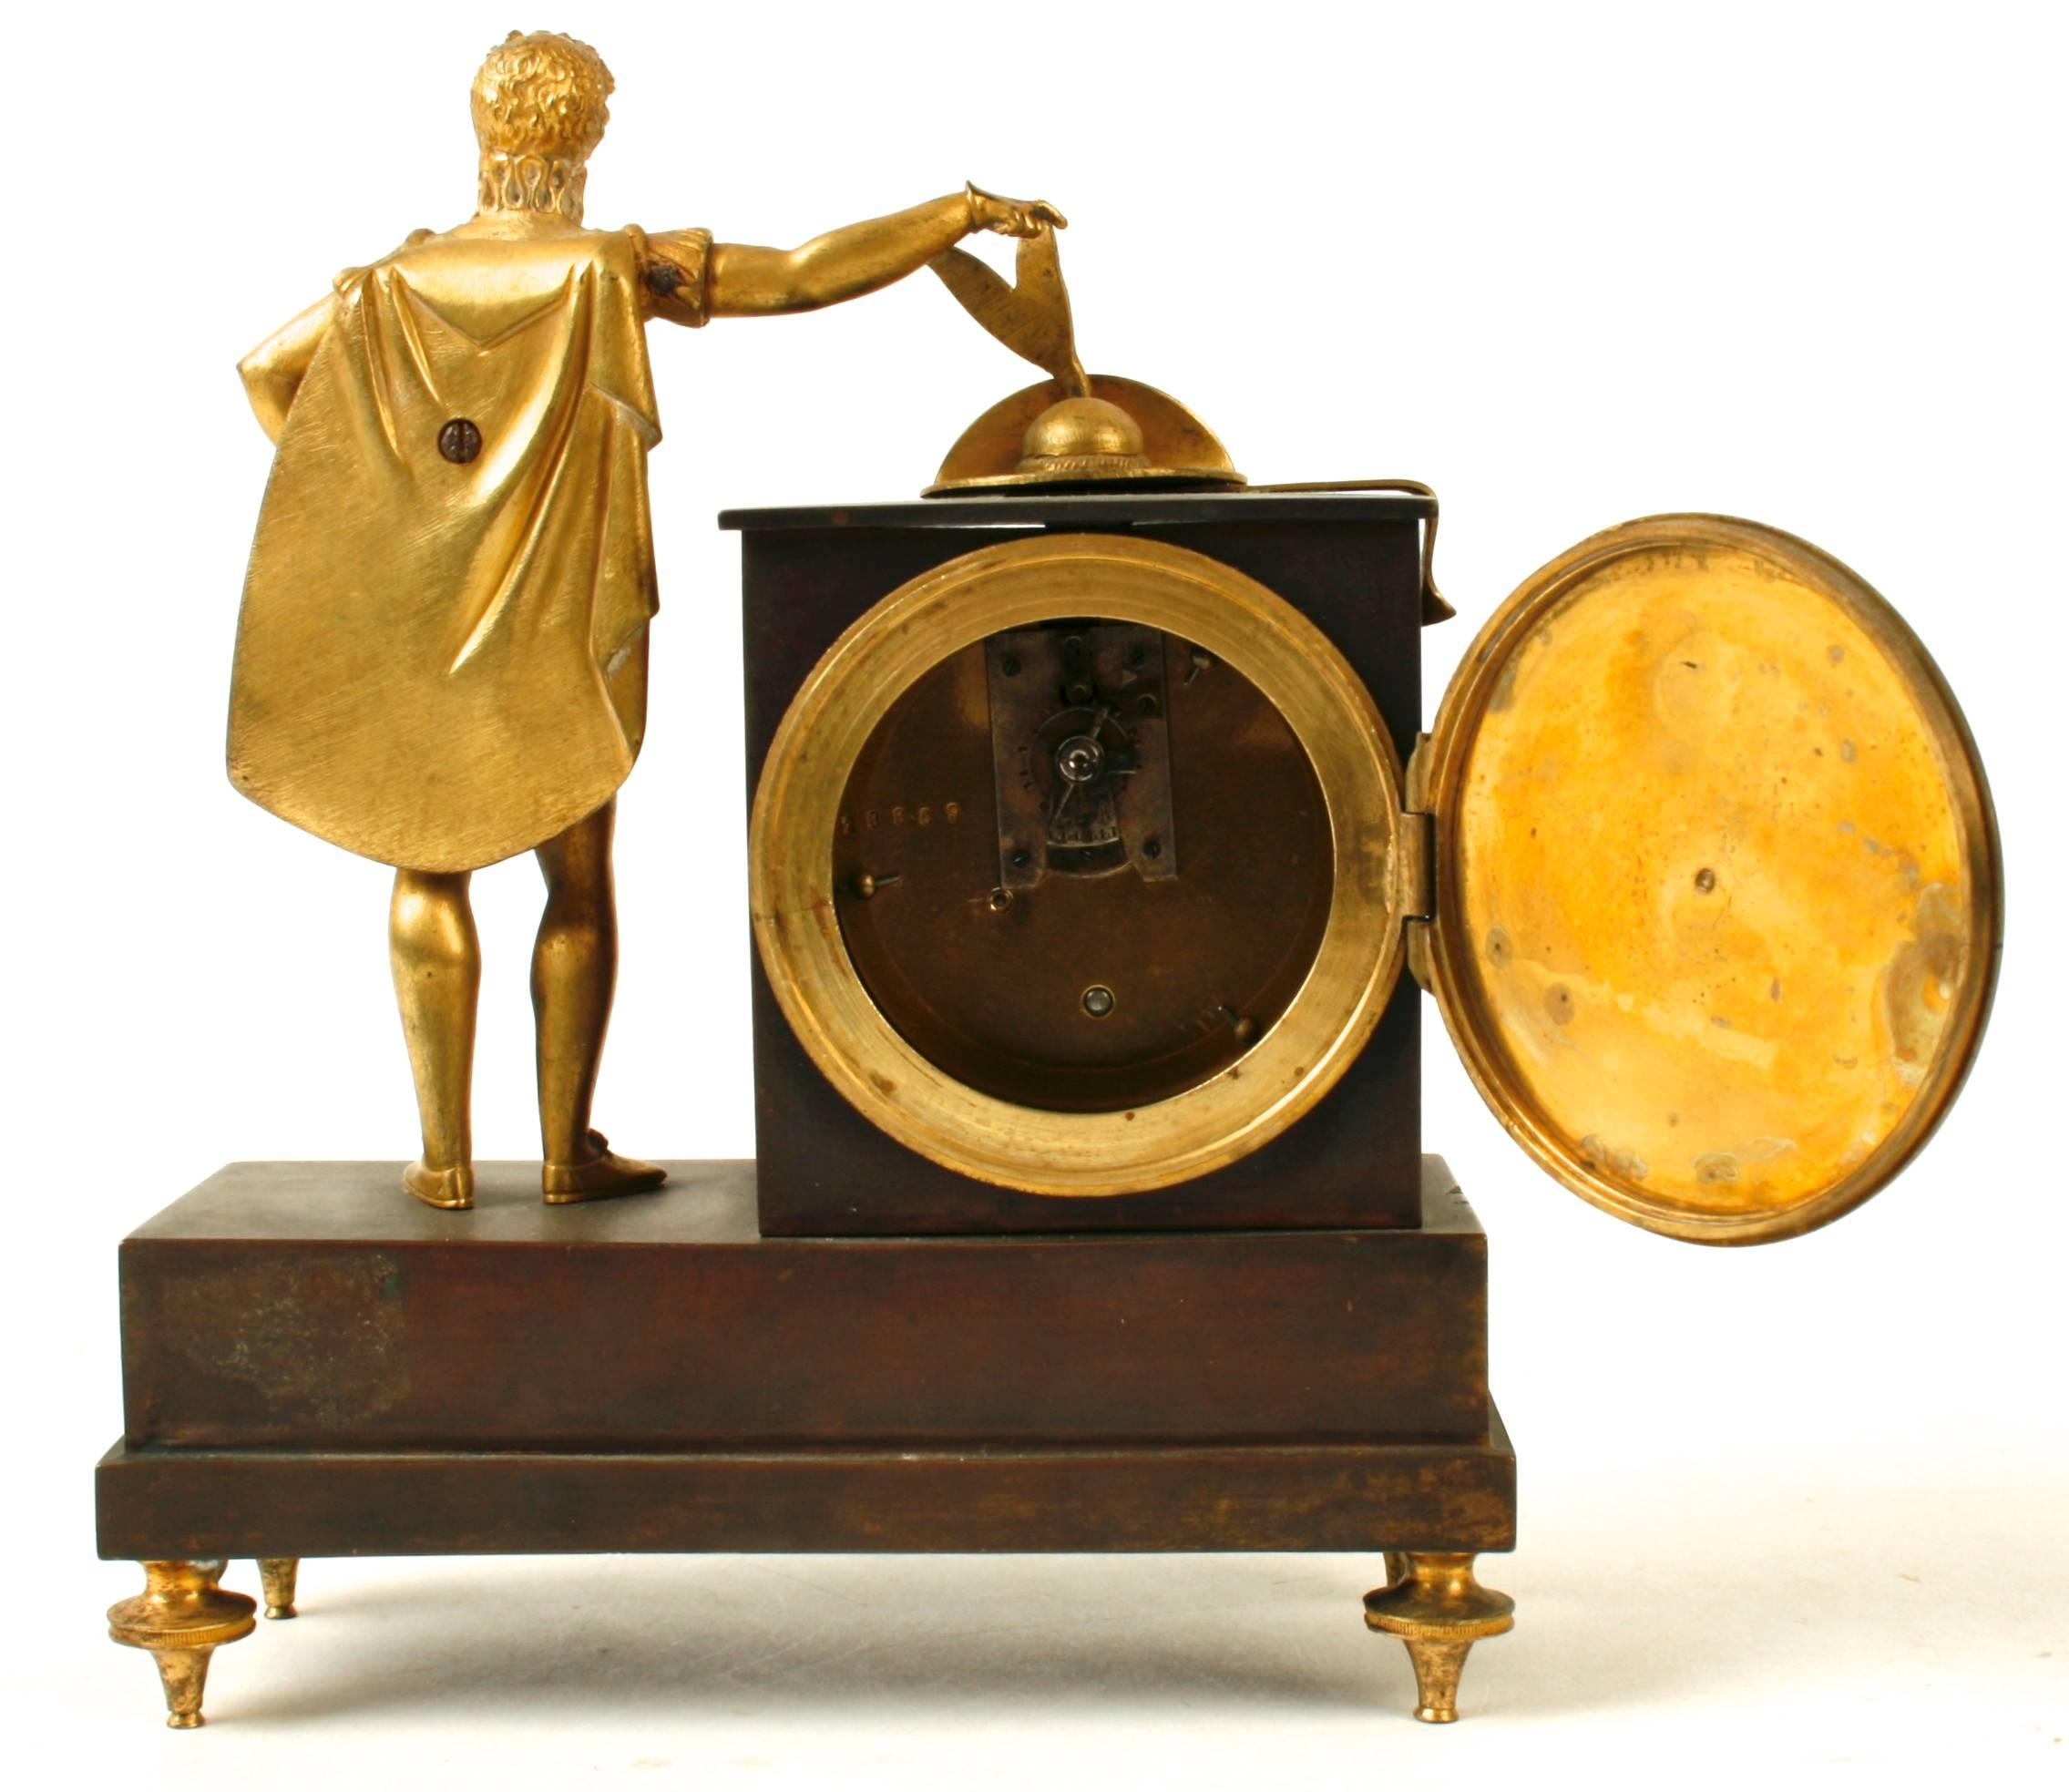 This handsome bronze mantel clock is from the French Empire period with a standing figure placing his feathered hat on top of the clock. The clock’s enameled face is surrounded by an ormolu twisted rope frame. The base is mounted with a tournament